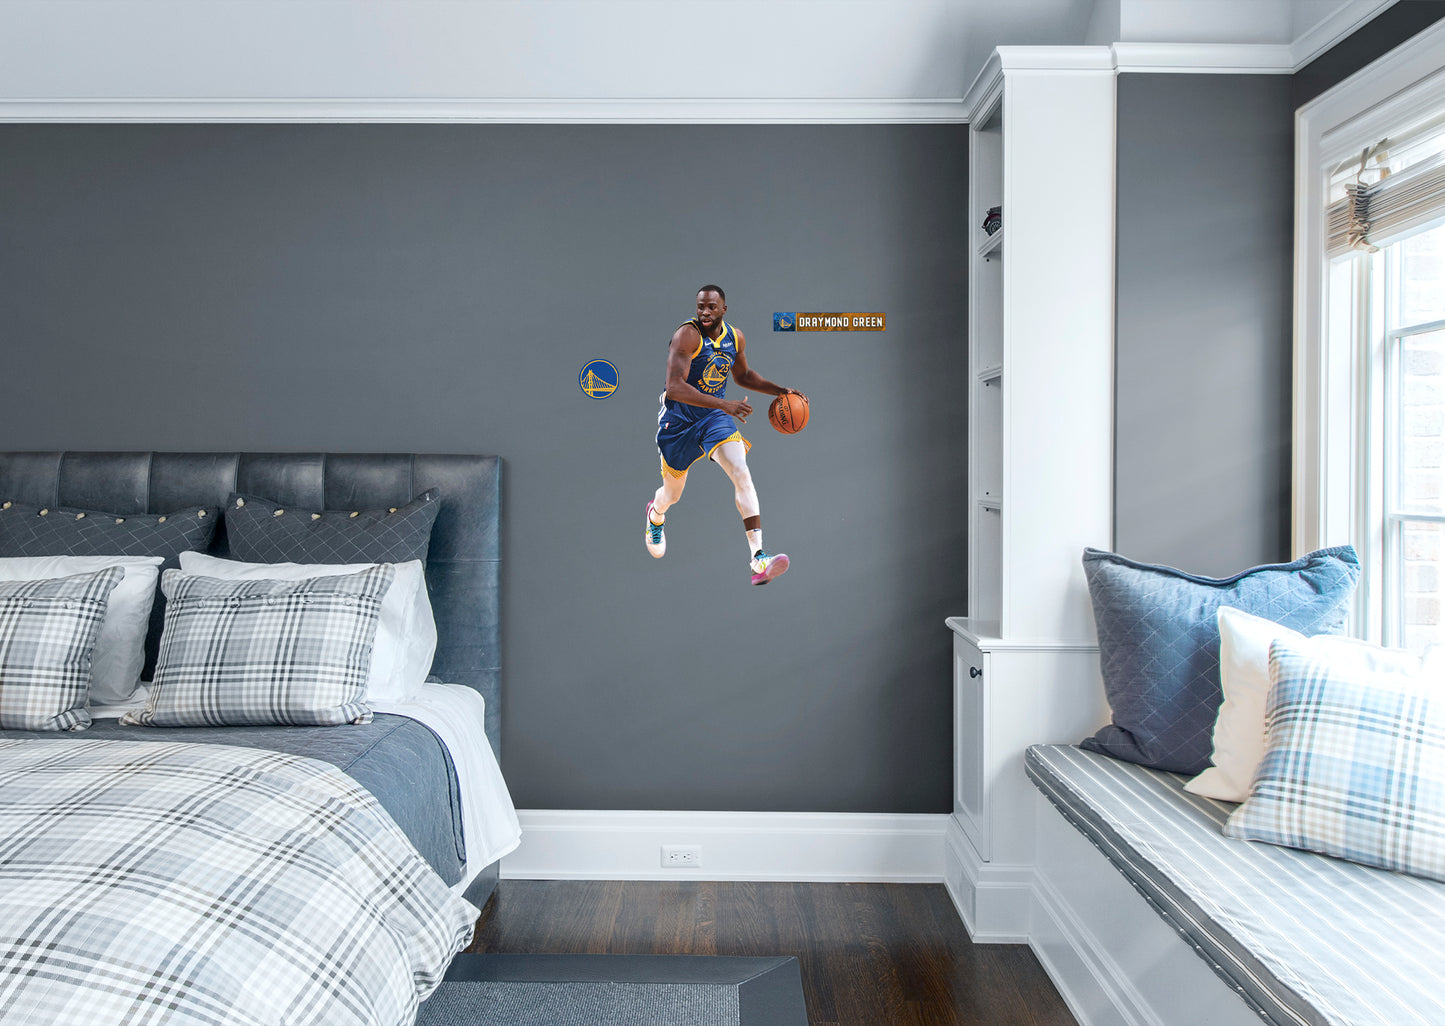 Golden State Warriors: Draymond Green         - Officially Licensed NBA Removable Wall   Adhesive Decal